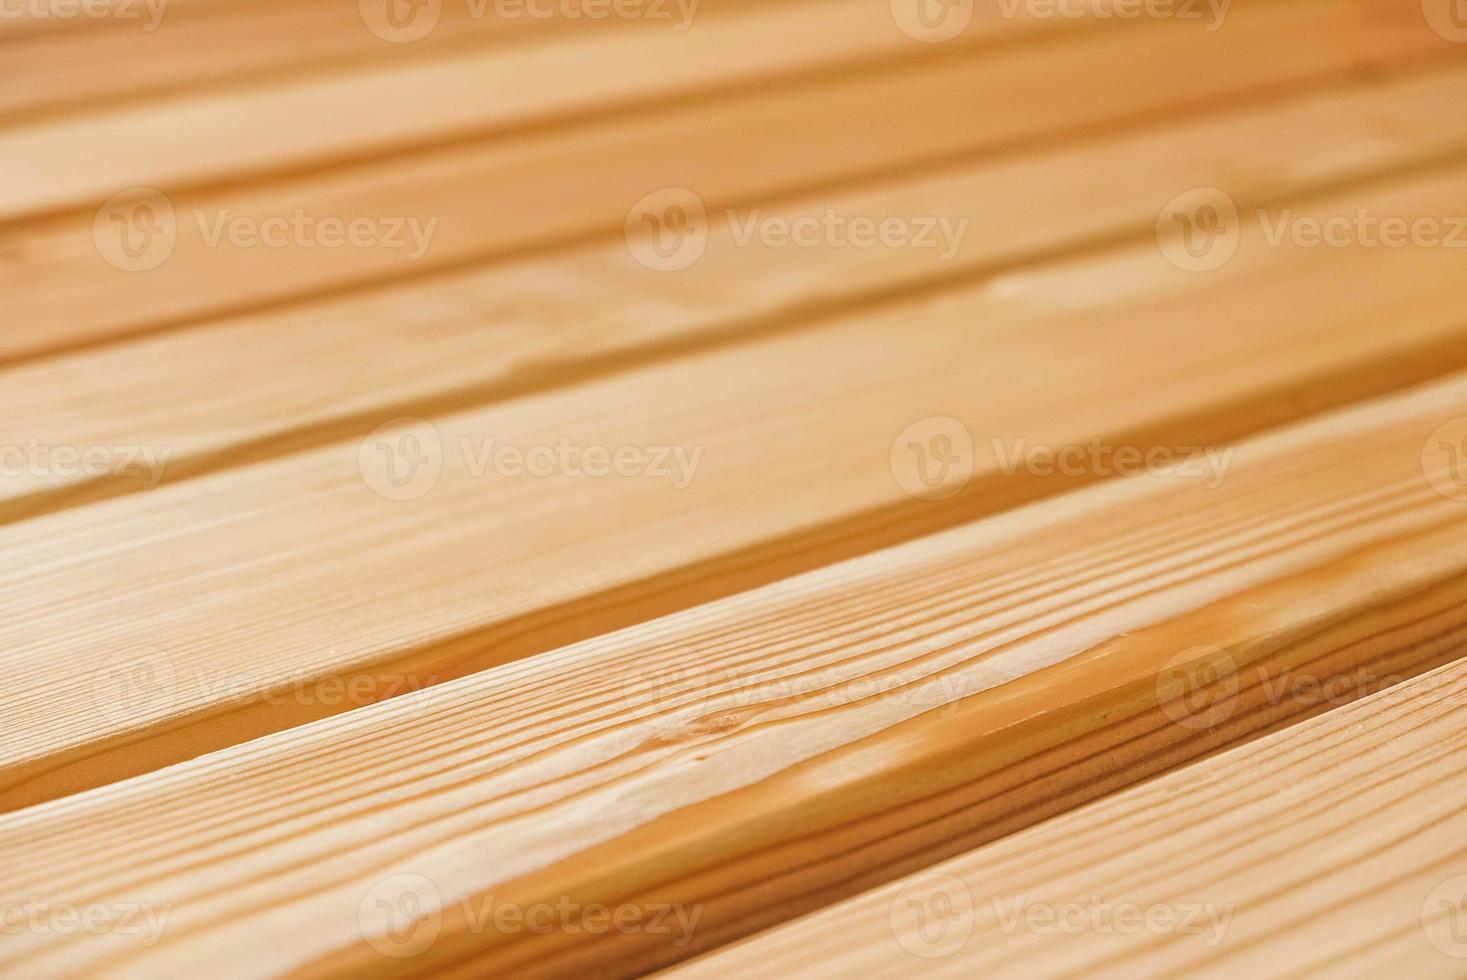 Boards of light natural wood as a background texture photo